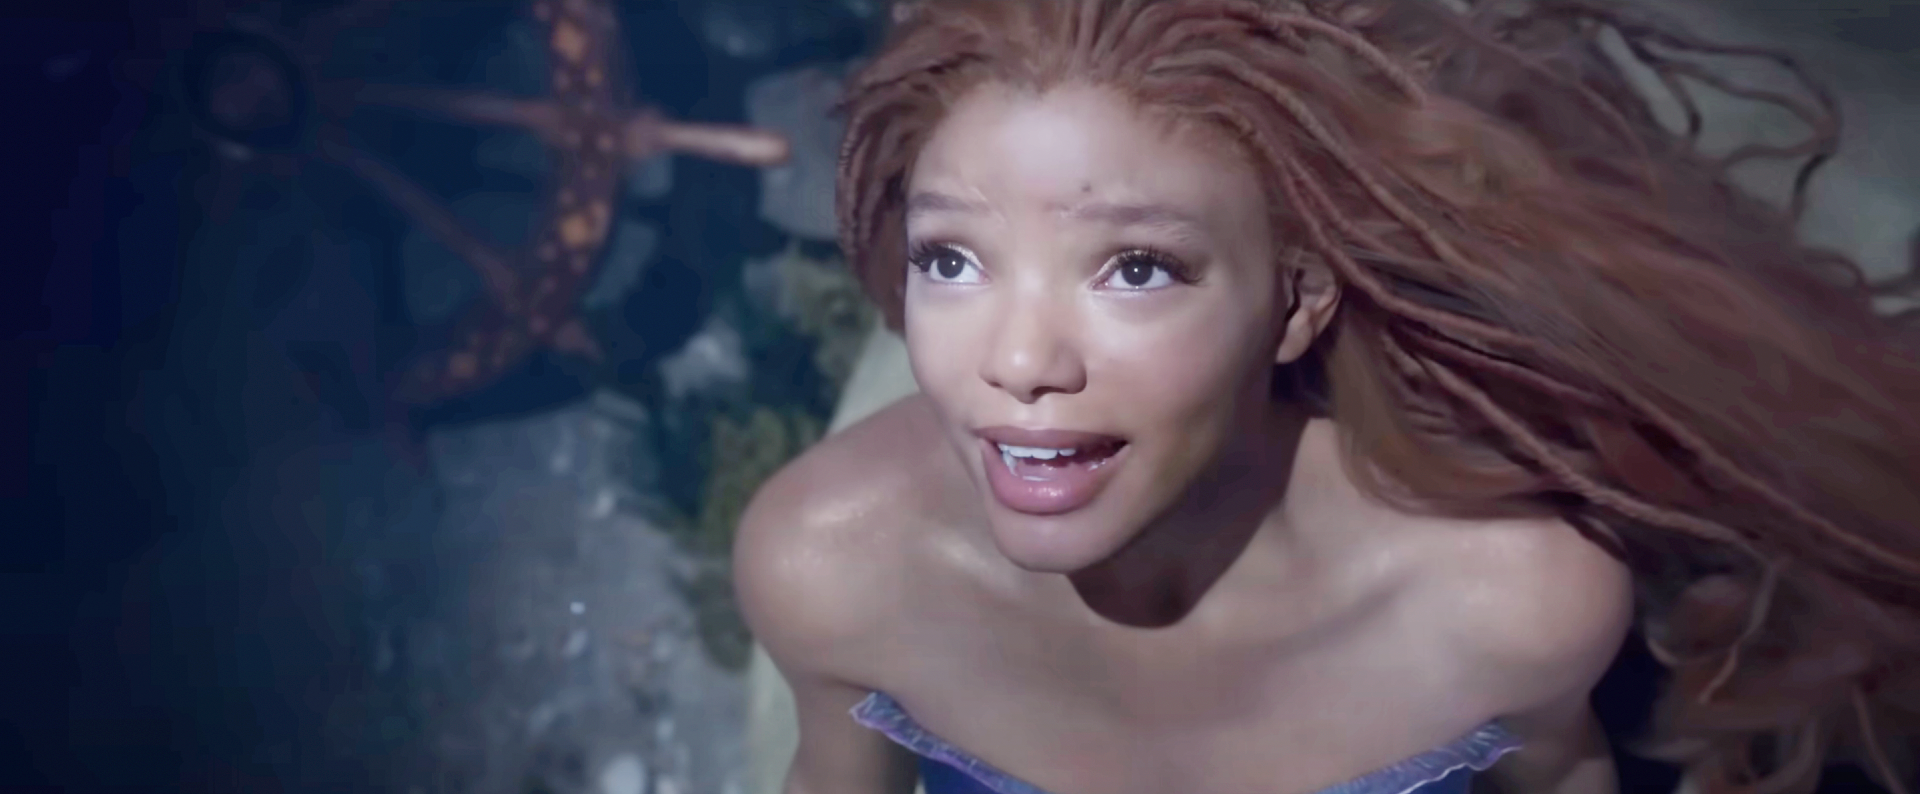 Halle Bailey singing as the Little Mermaid